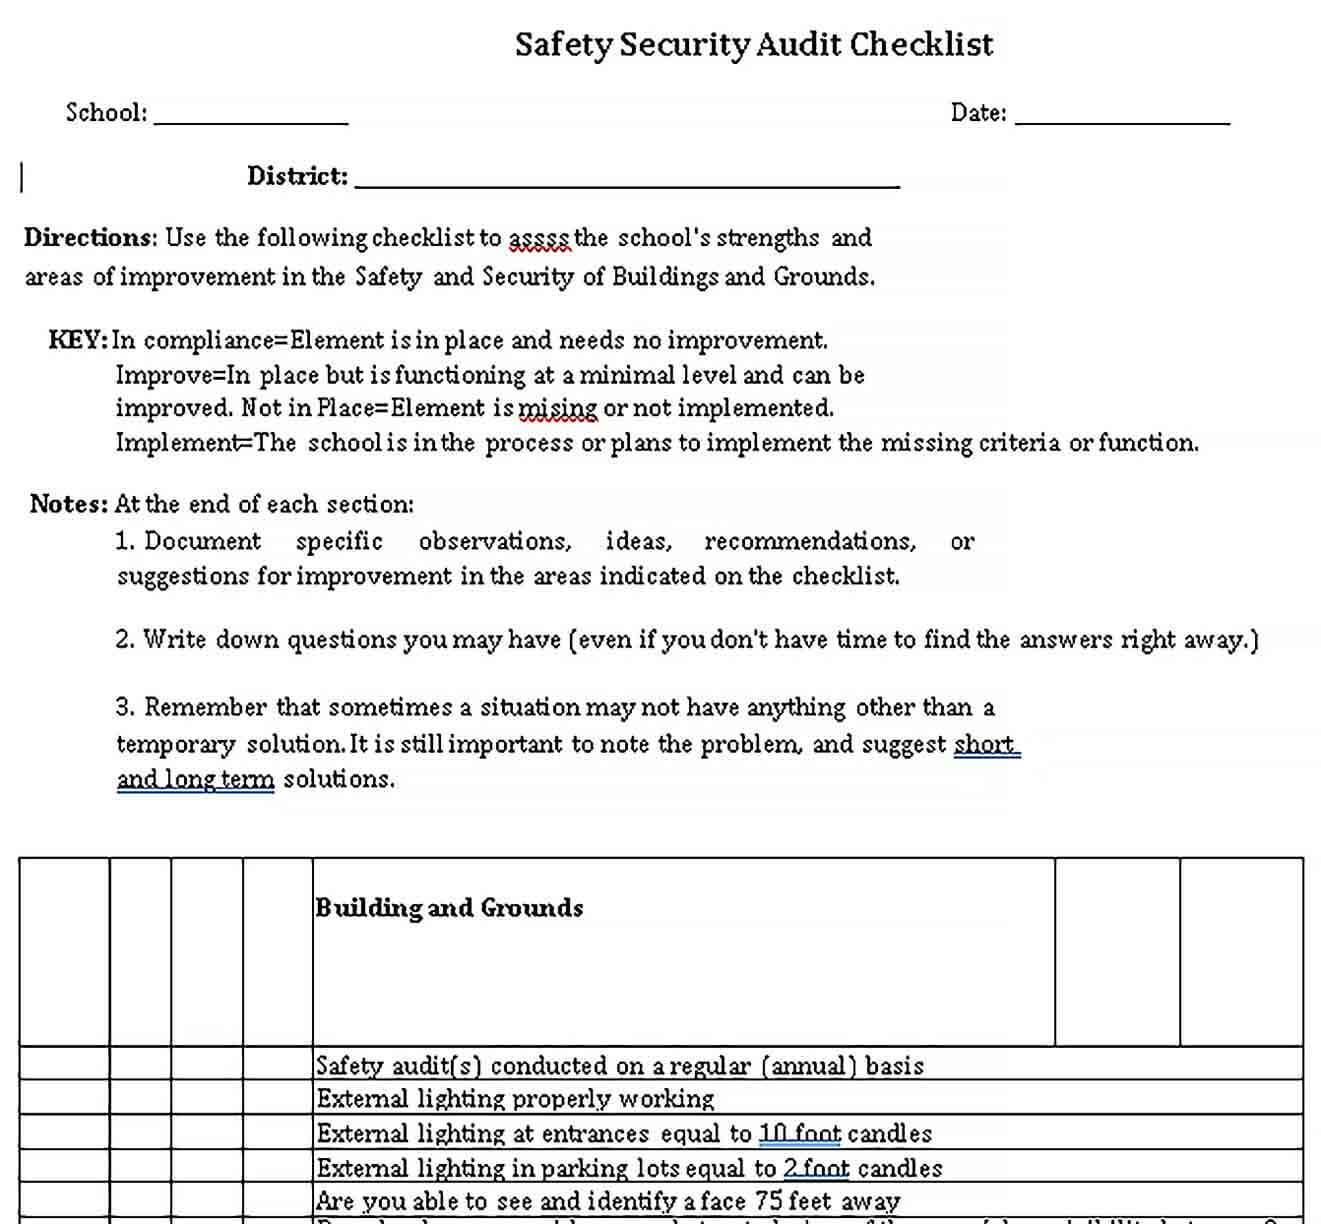 Sample Safety Security Audit Checklist Examples